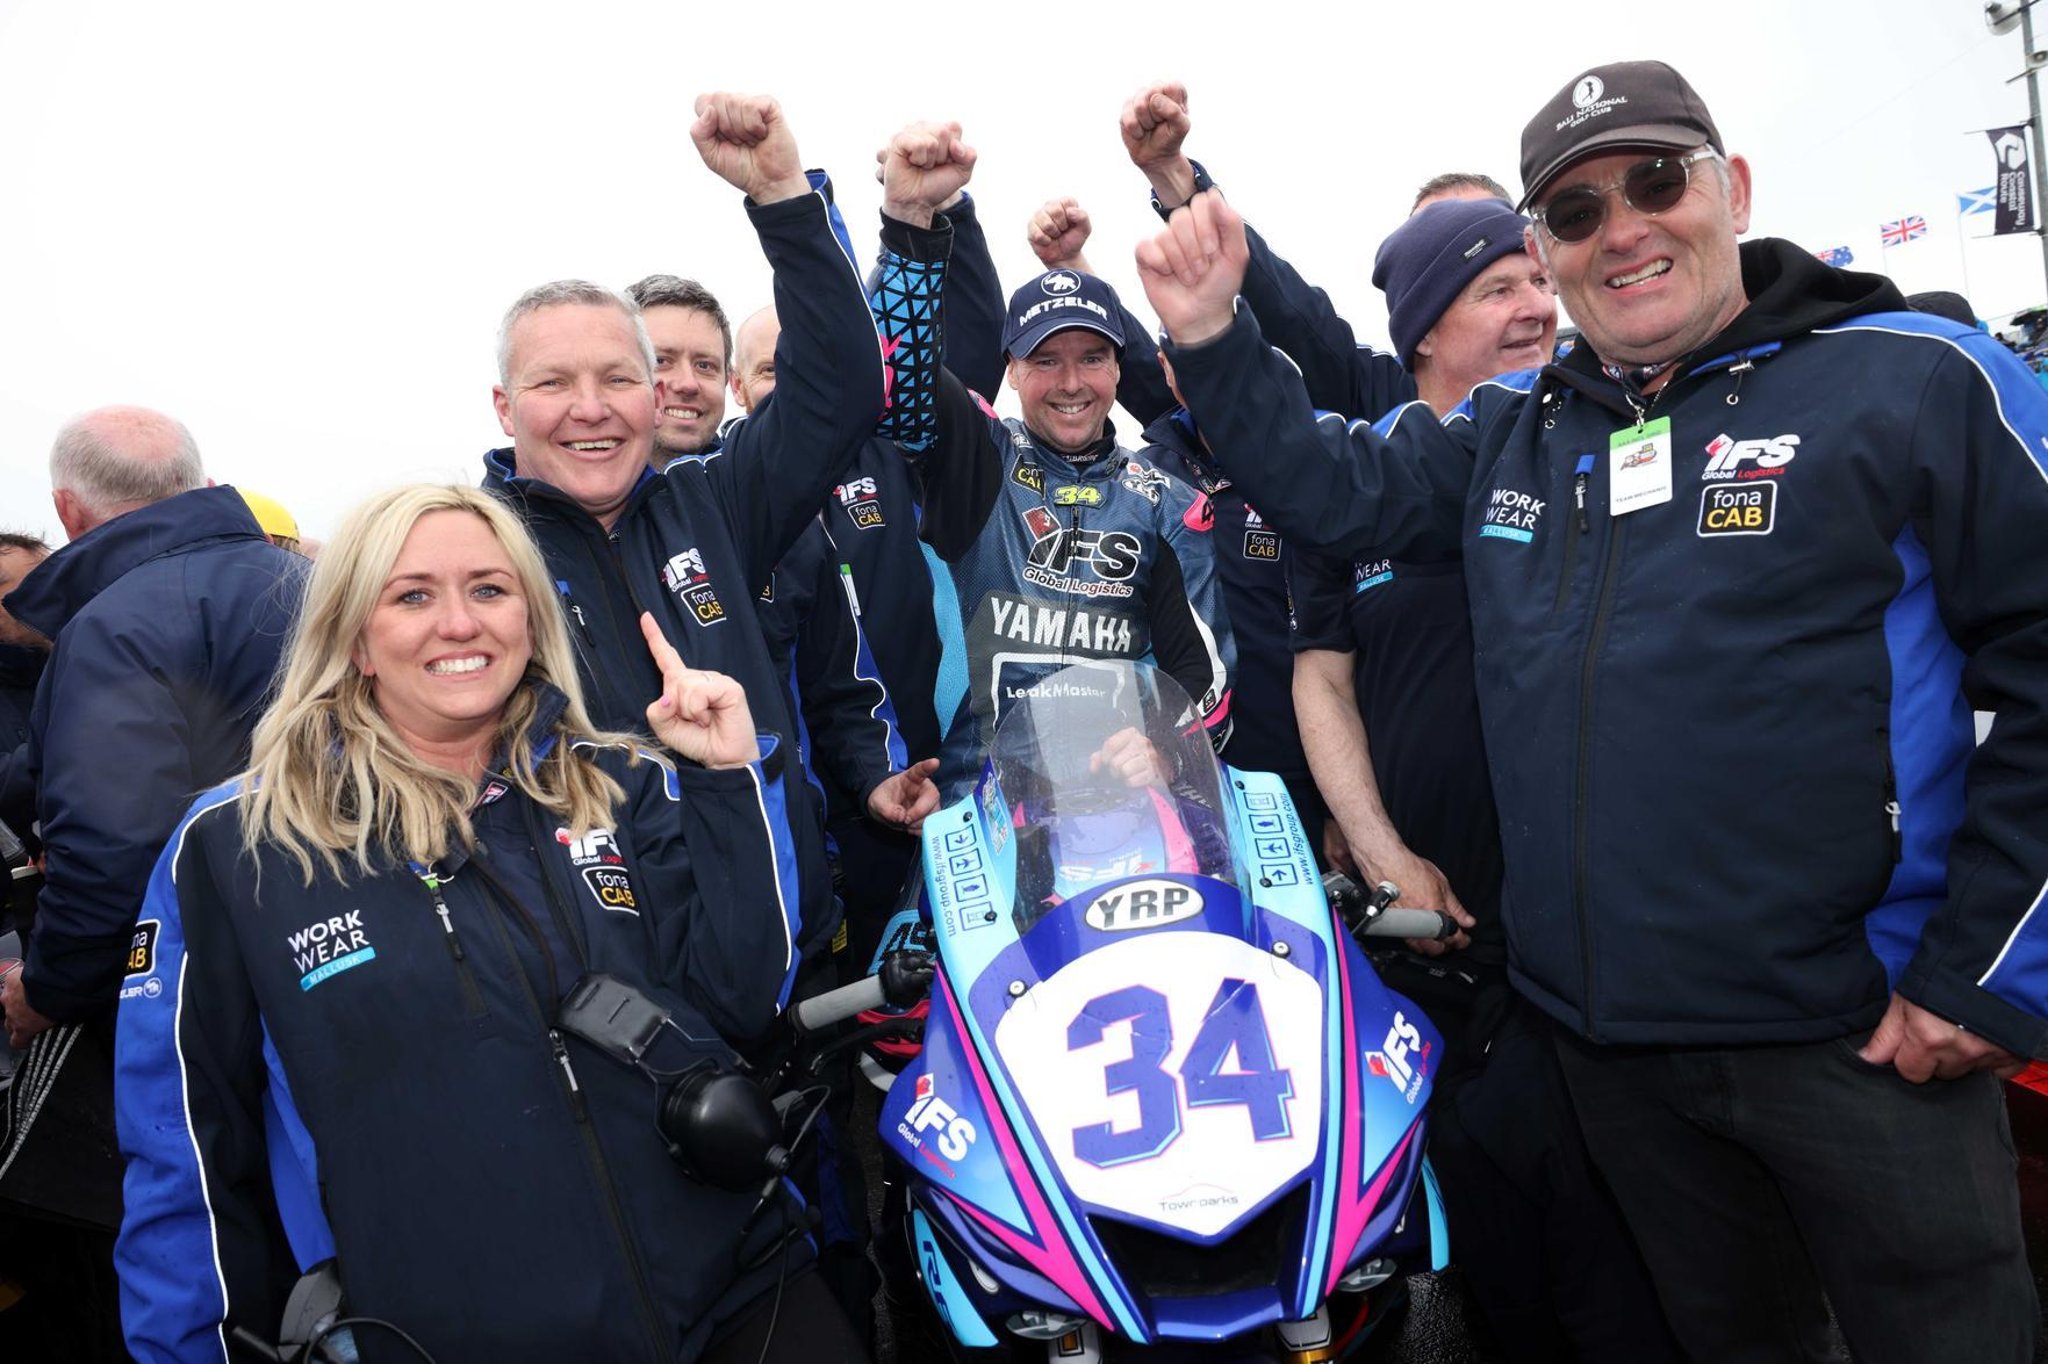 NW200: Thursday double for Alastair Seeley after dominant wet Superstock success